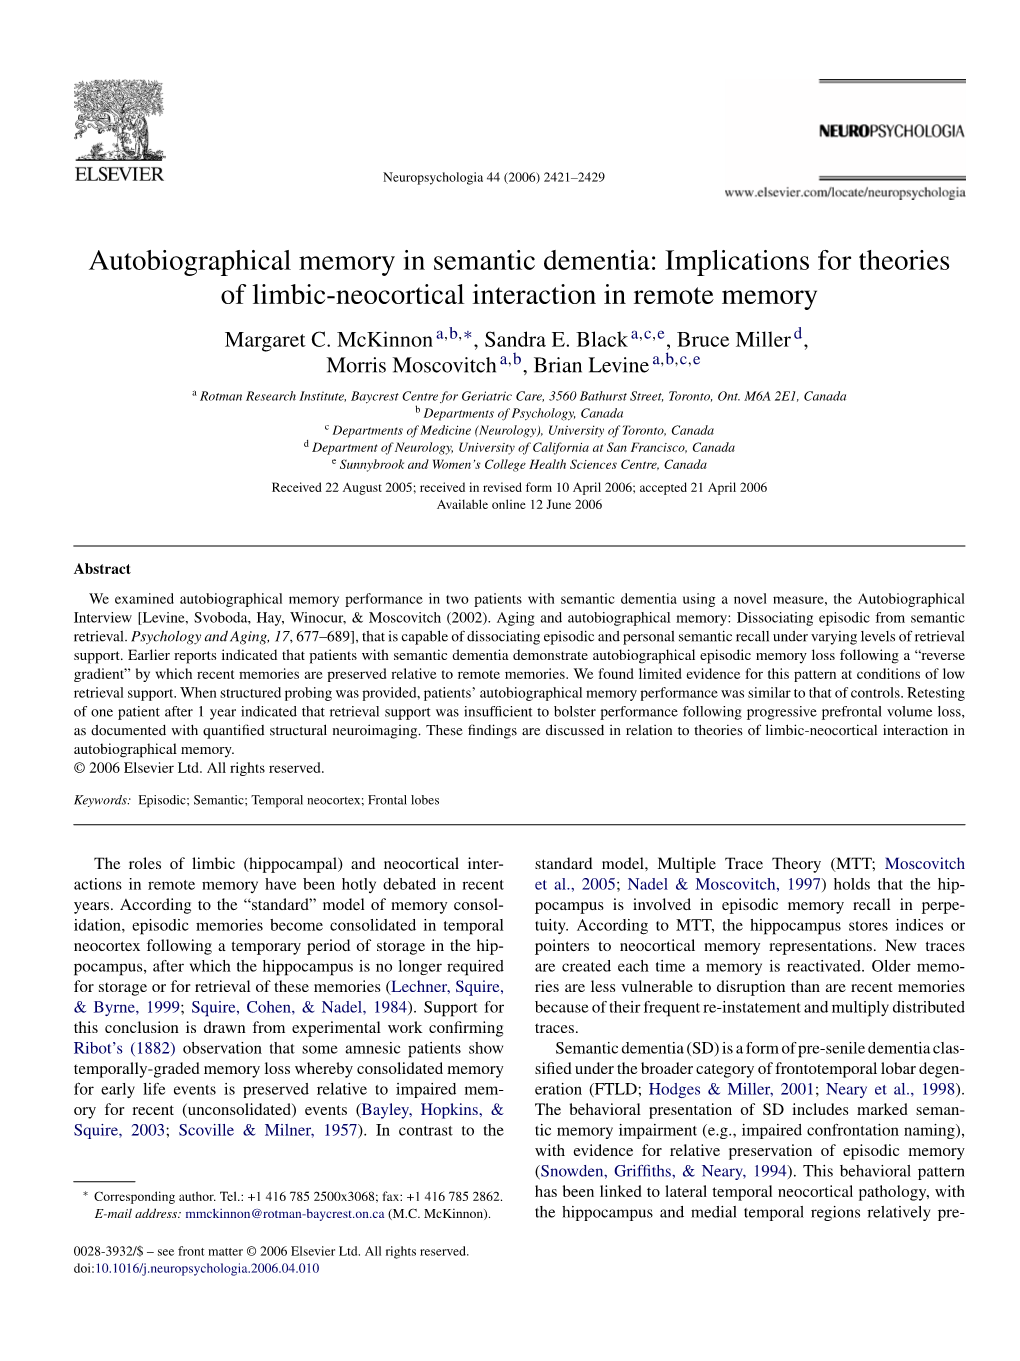 Autobiographical Memory in Semantic Dementia: Implications for Theories of Limbic-Neocortical Interaction in Remote Memory Margaret C